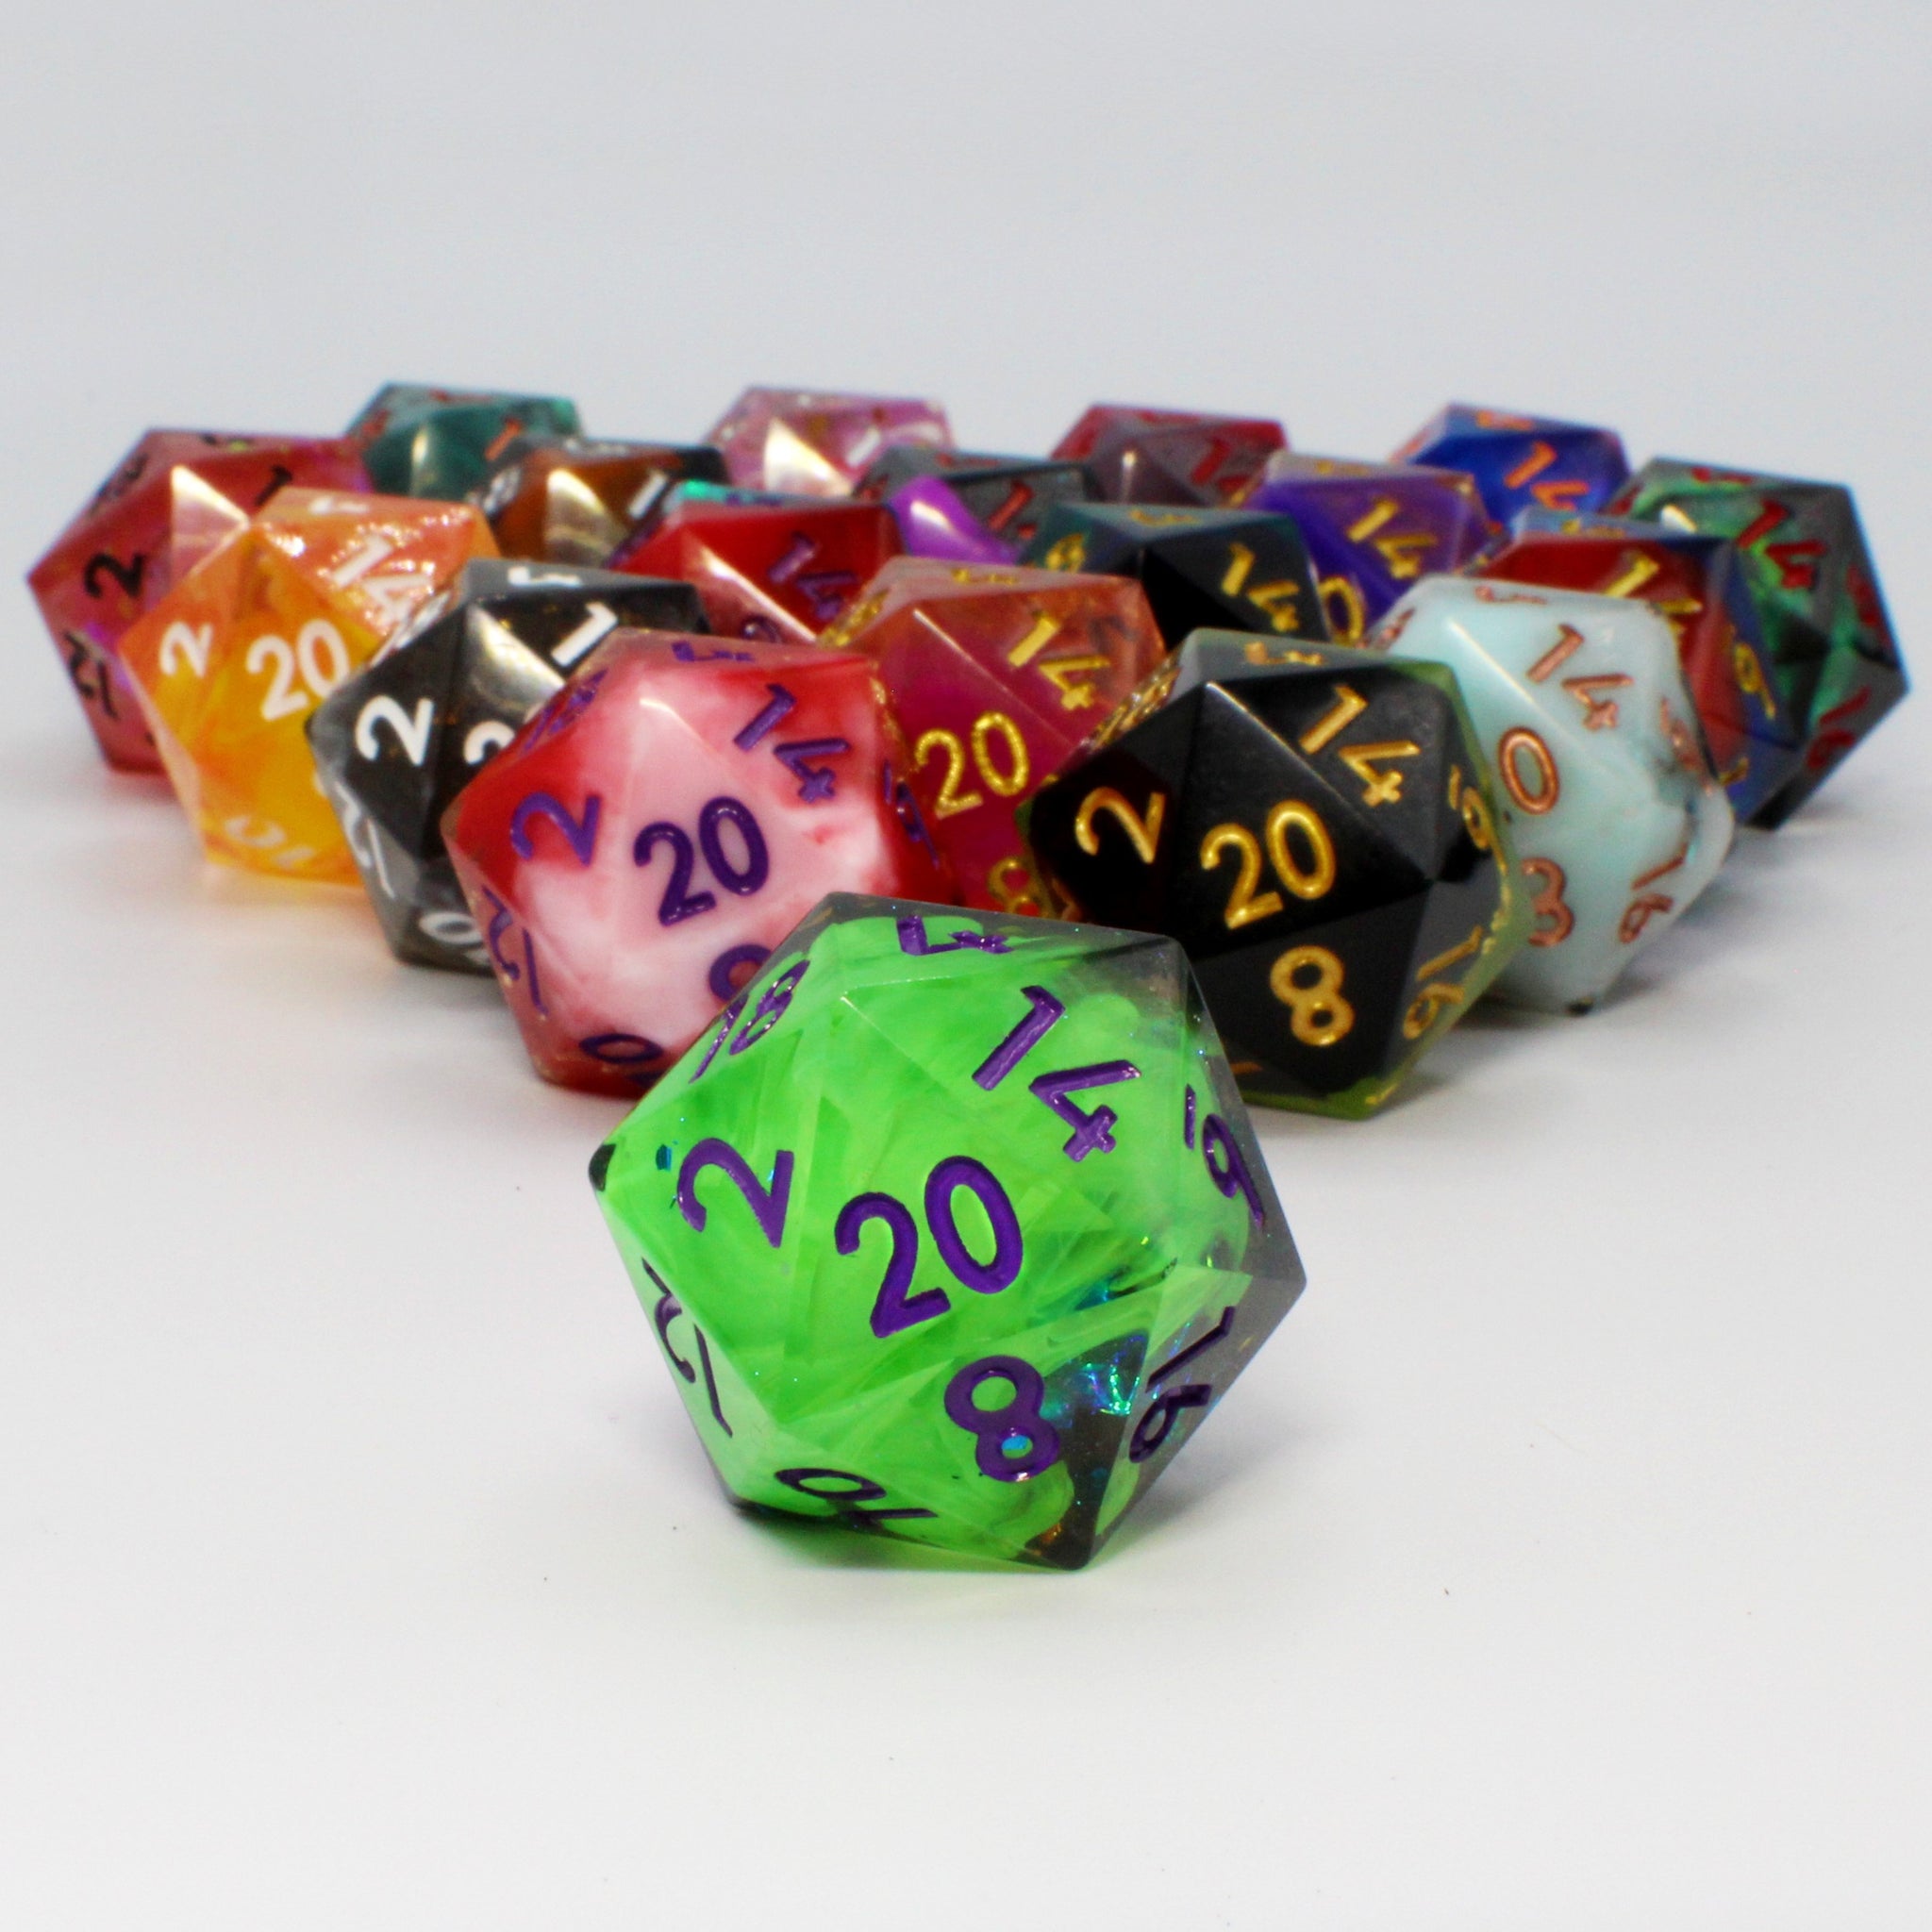 Sharp Edge Dice: Neon Green and Black with Blue Holographic Foil